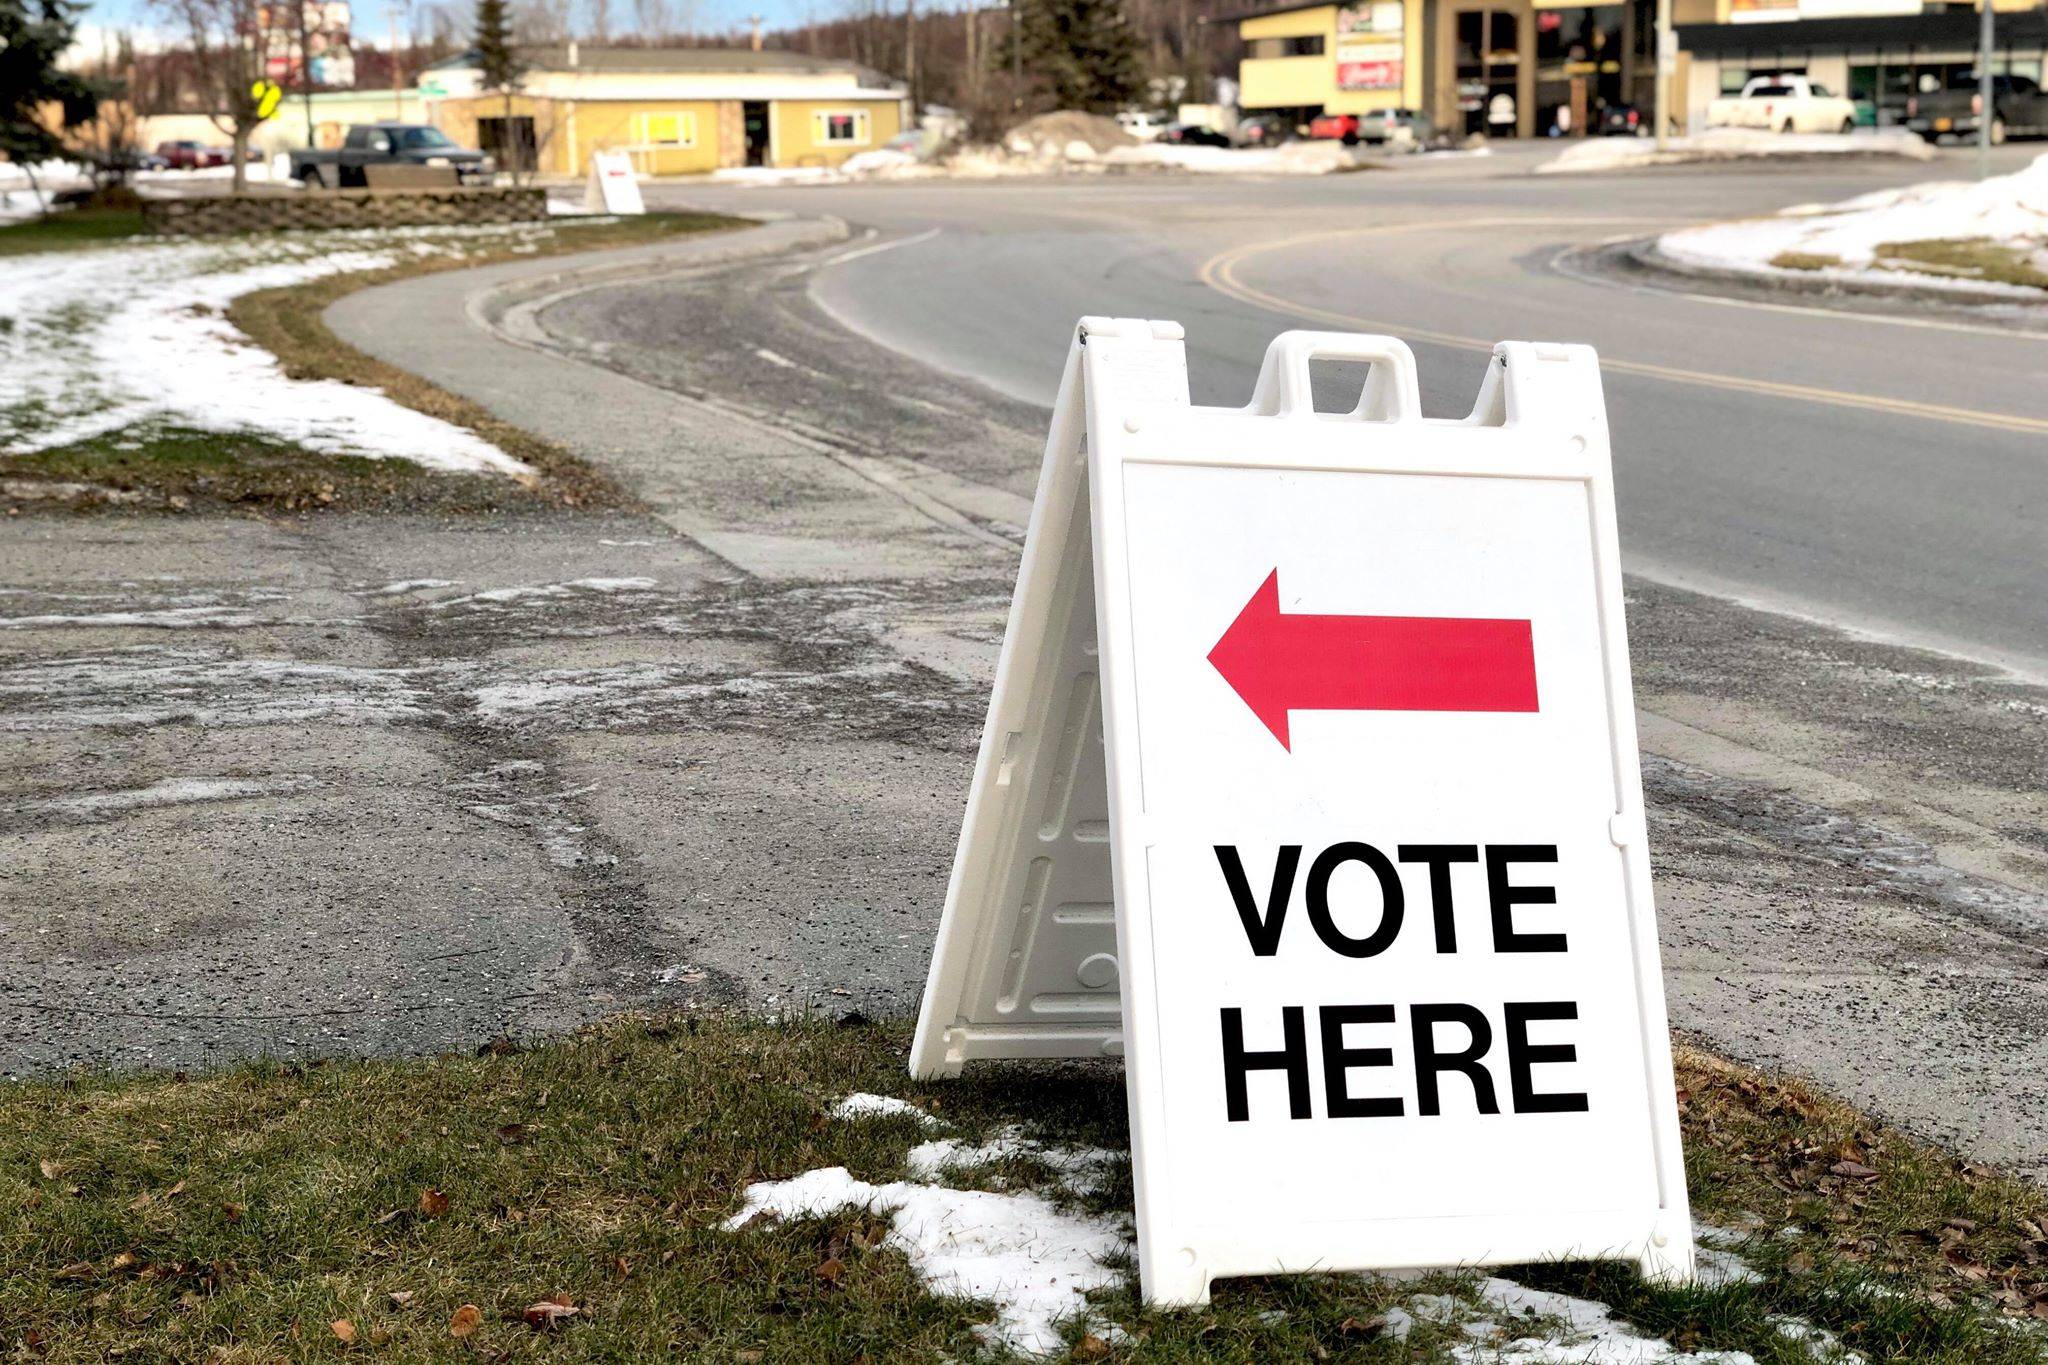 A sign directs voters to Soldotna City Hall to cast their ballots, Dec. 17, 2019, in Soldotna, Alaska. (Photo by Victoria Petersen/Peninsula Clarion)